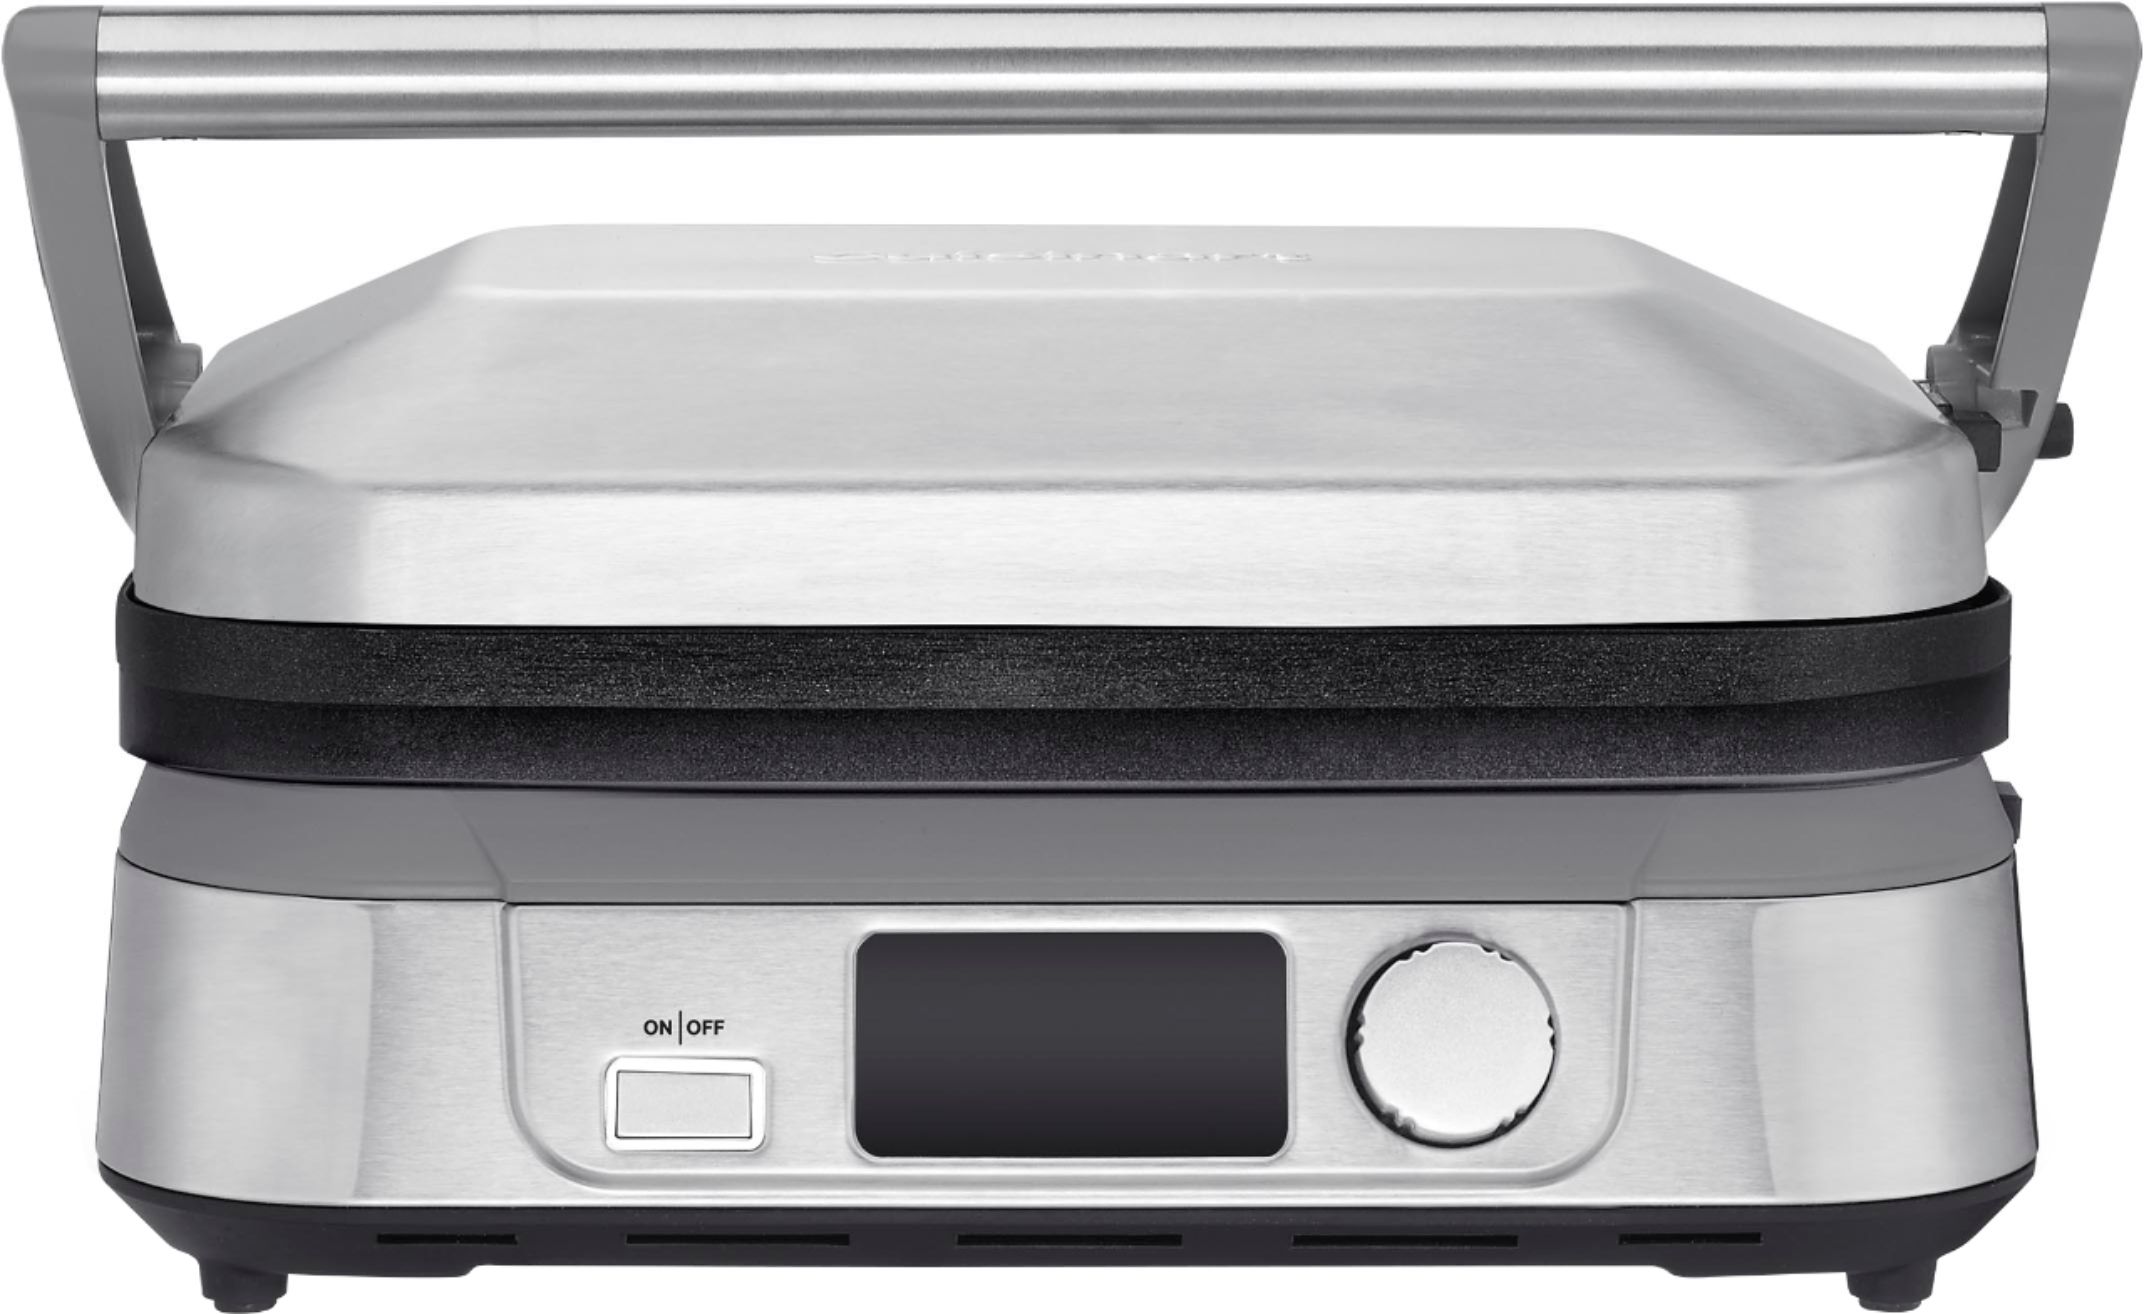 Angle View: Cuisinart - Griddler Five - Stainless Steel